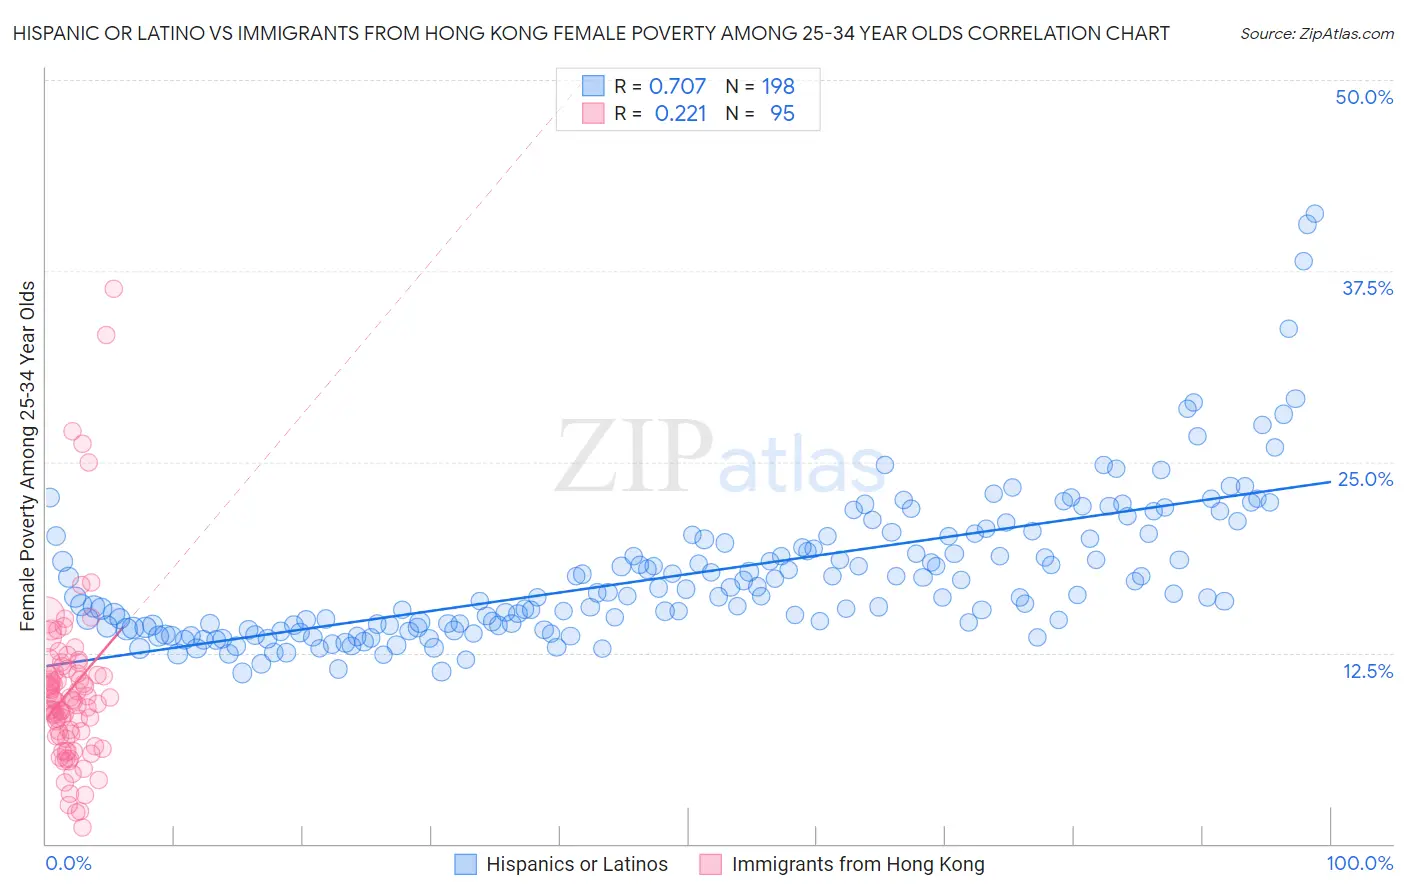 Hispanic or Latino vs Immigrants from Hong Kong Female Poverty Among 25-34 Year Olds